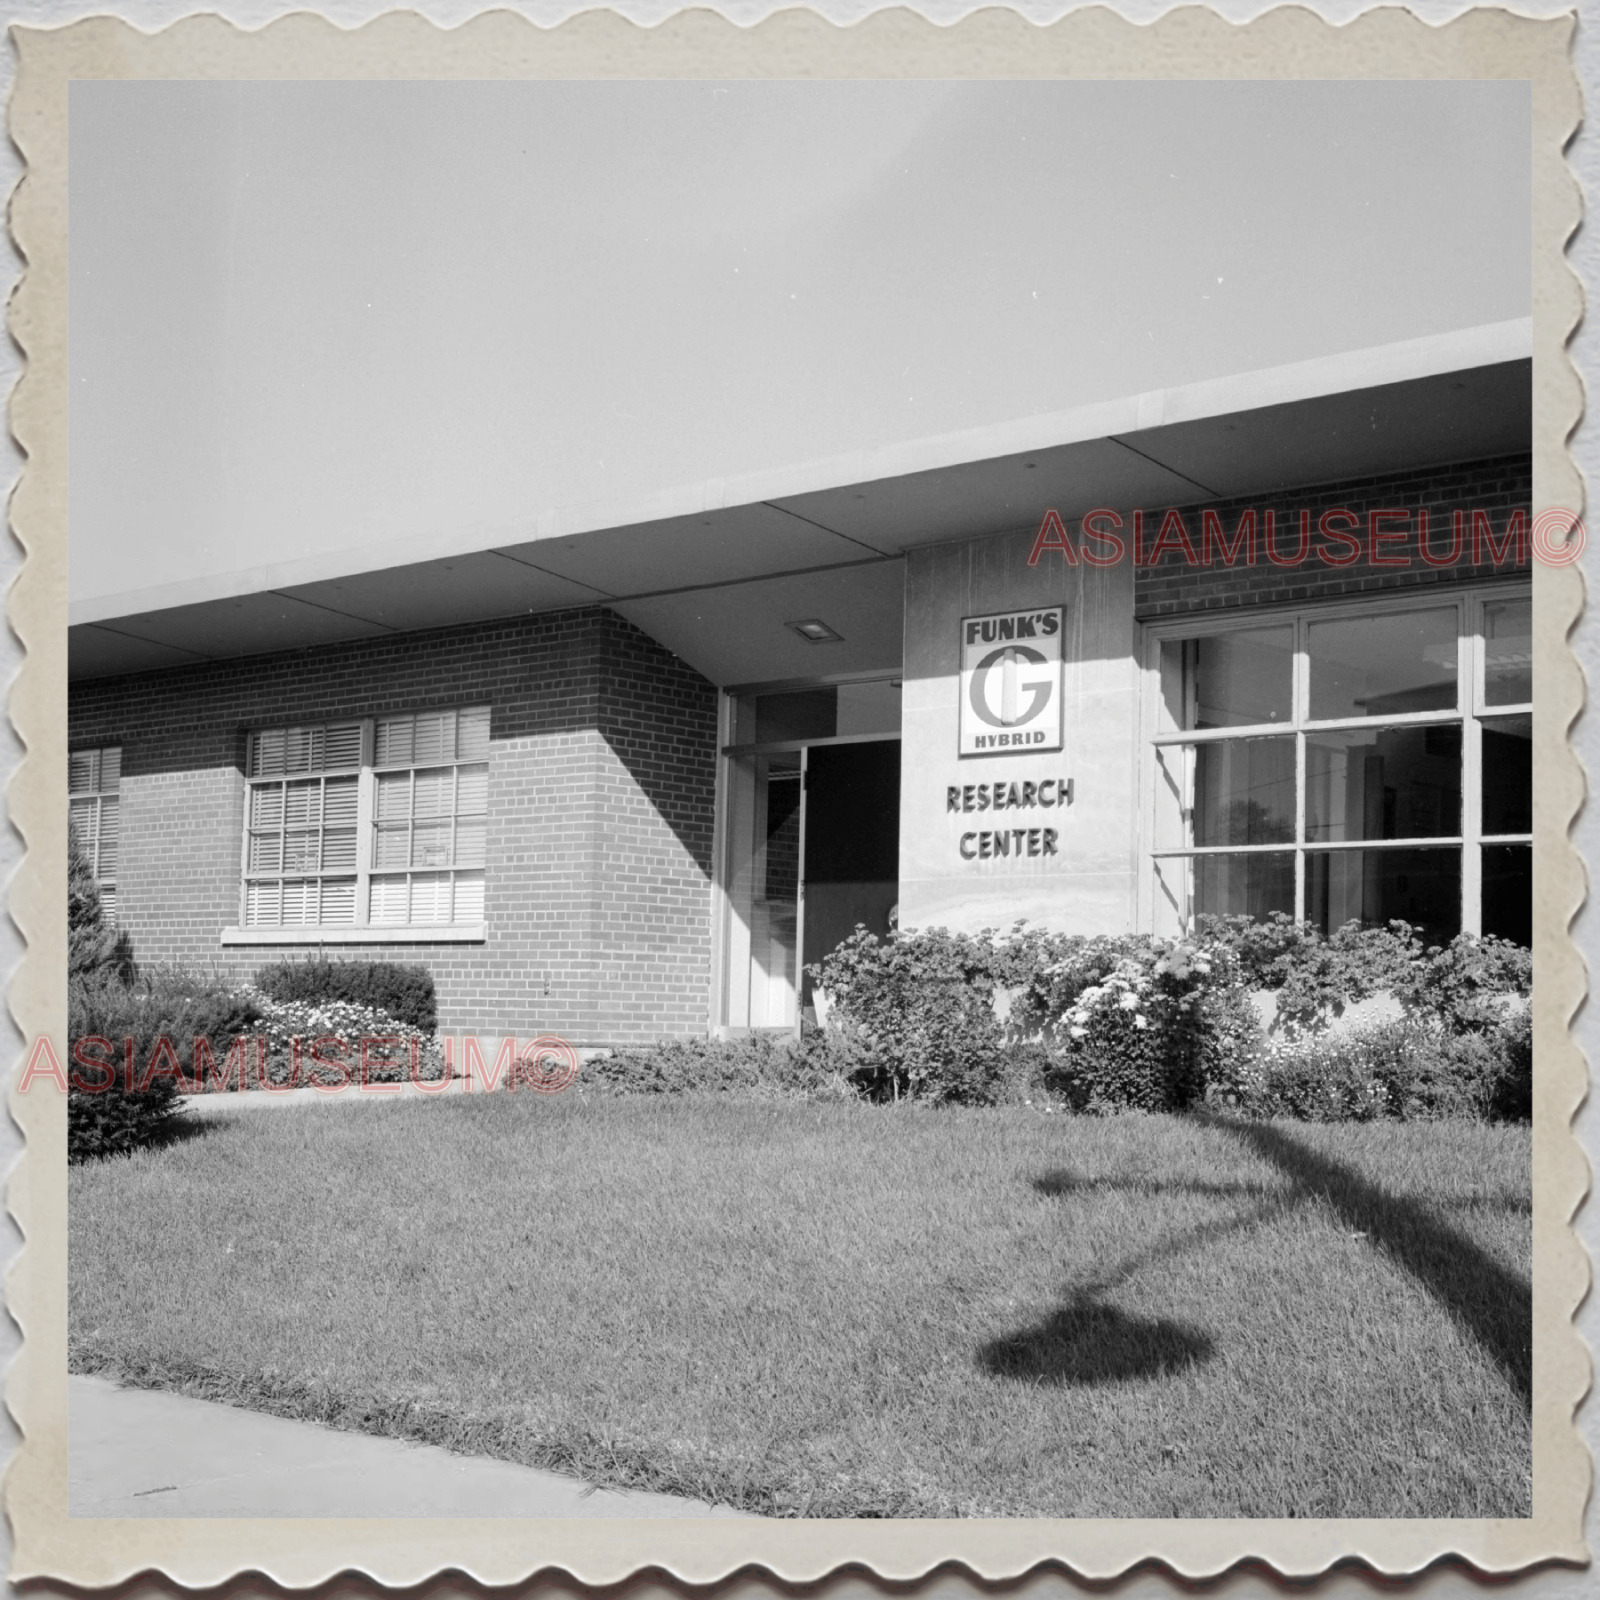 40s BLOOMINGTON CORN RESEARCH CENTER INDIANA FARM OLD Vintage Photograph S8316